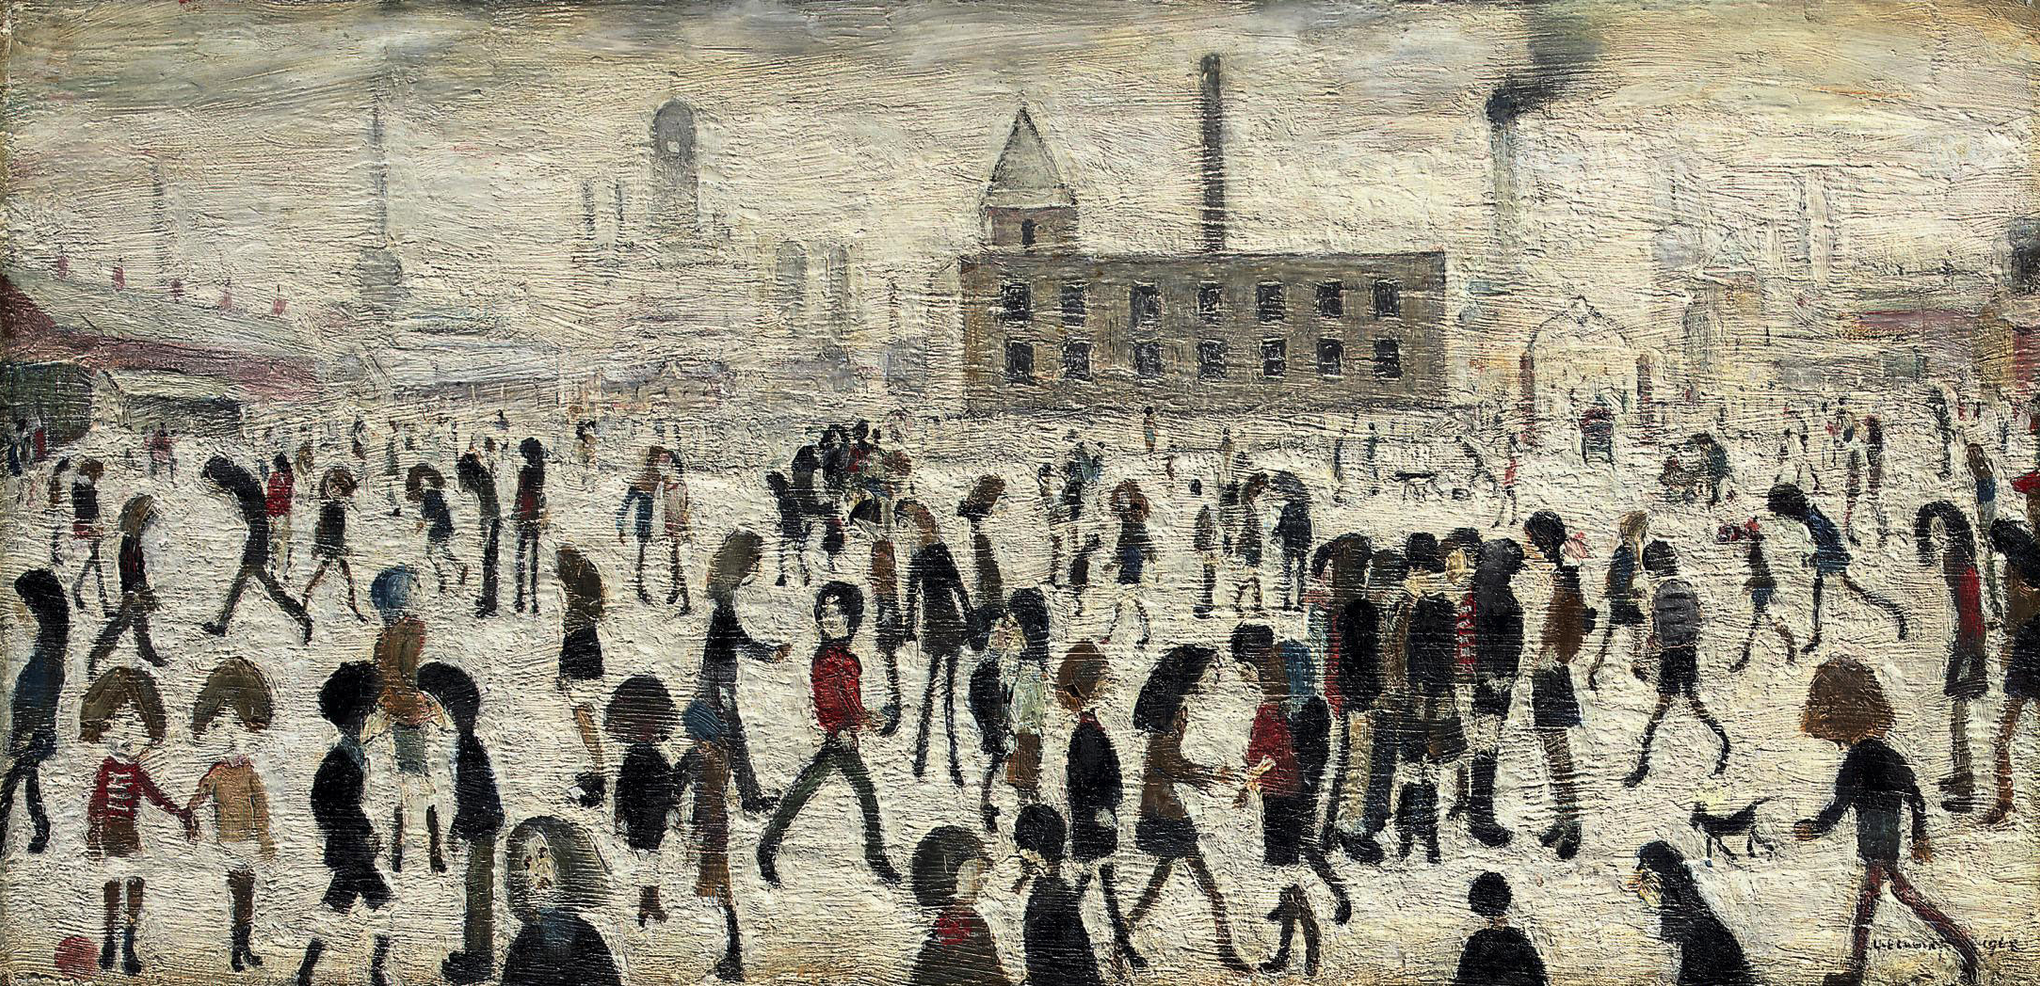 An Open Space (1968) by Laurence Stephen Lowry (1887 - 1976), English artist.